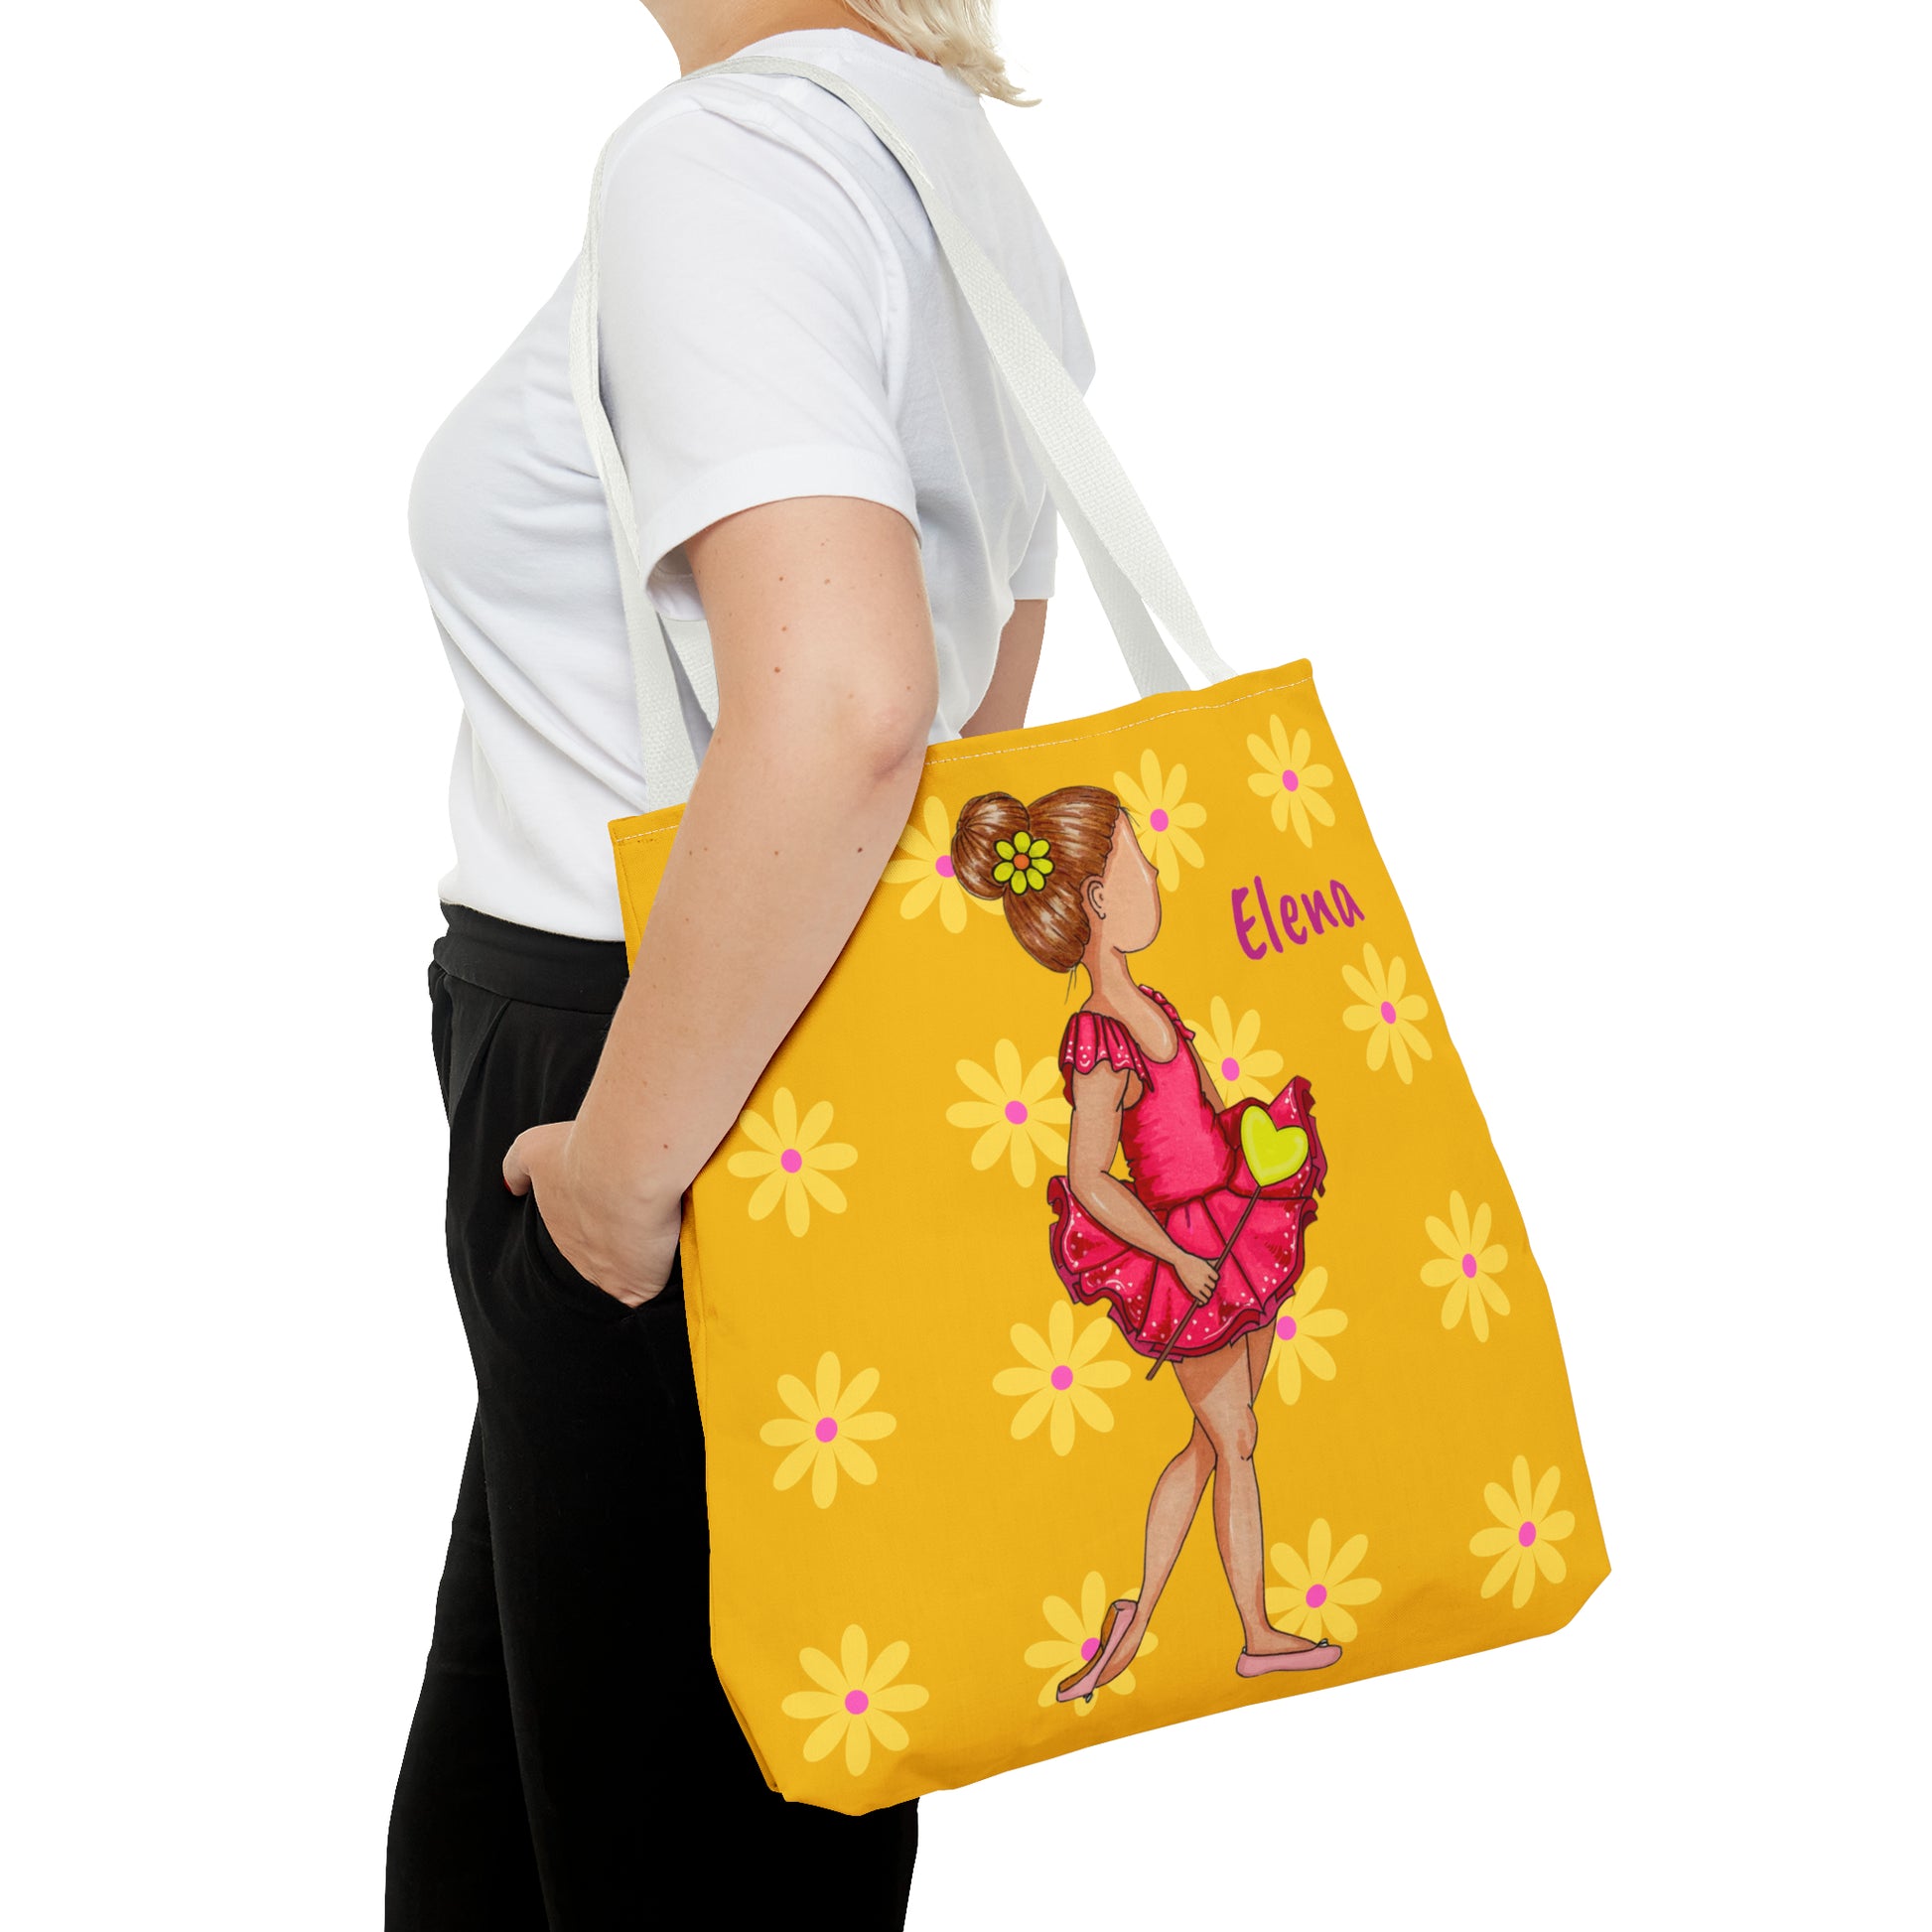 a woman carrying a yellow bag with a picture of a girl on it